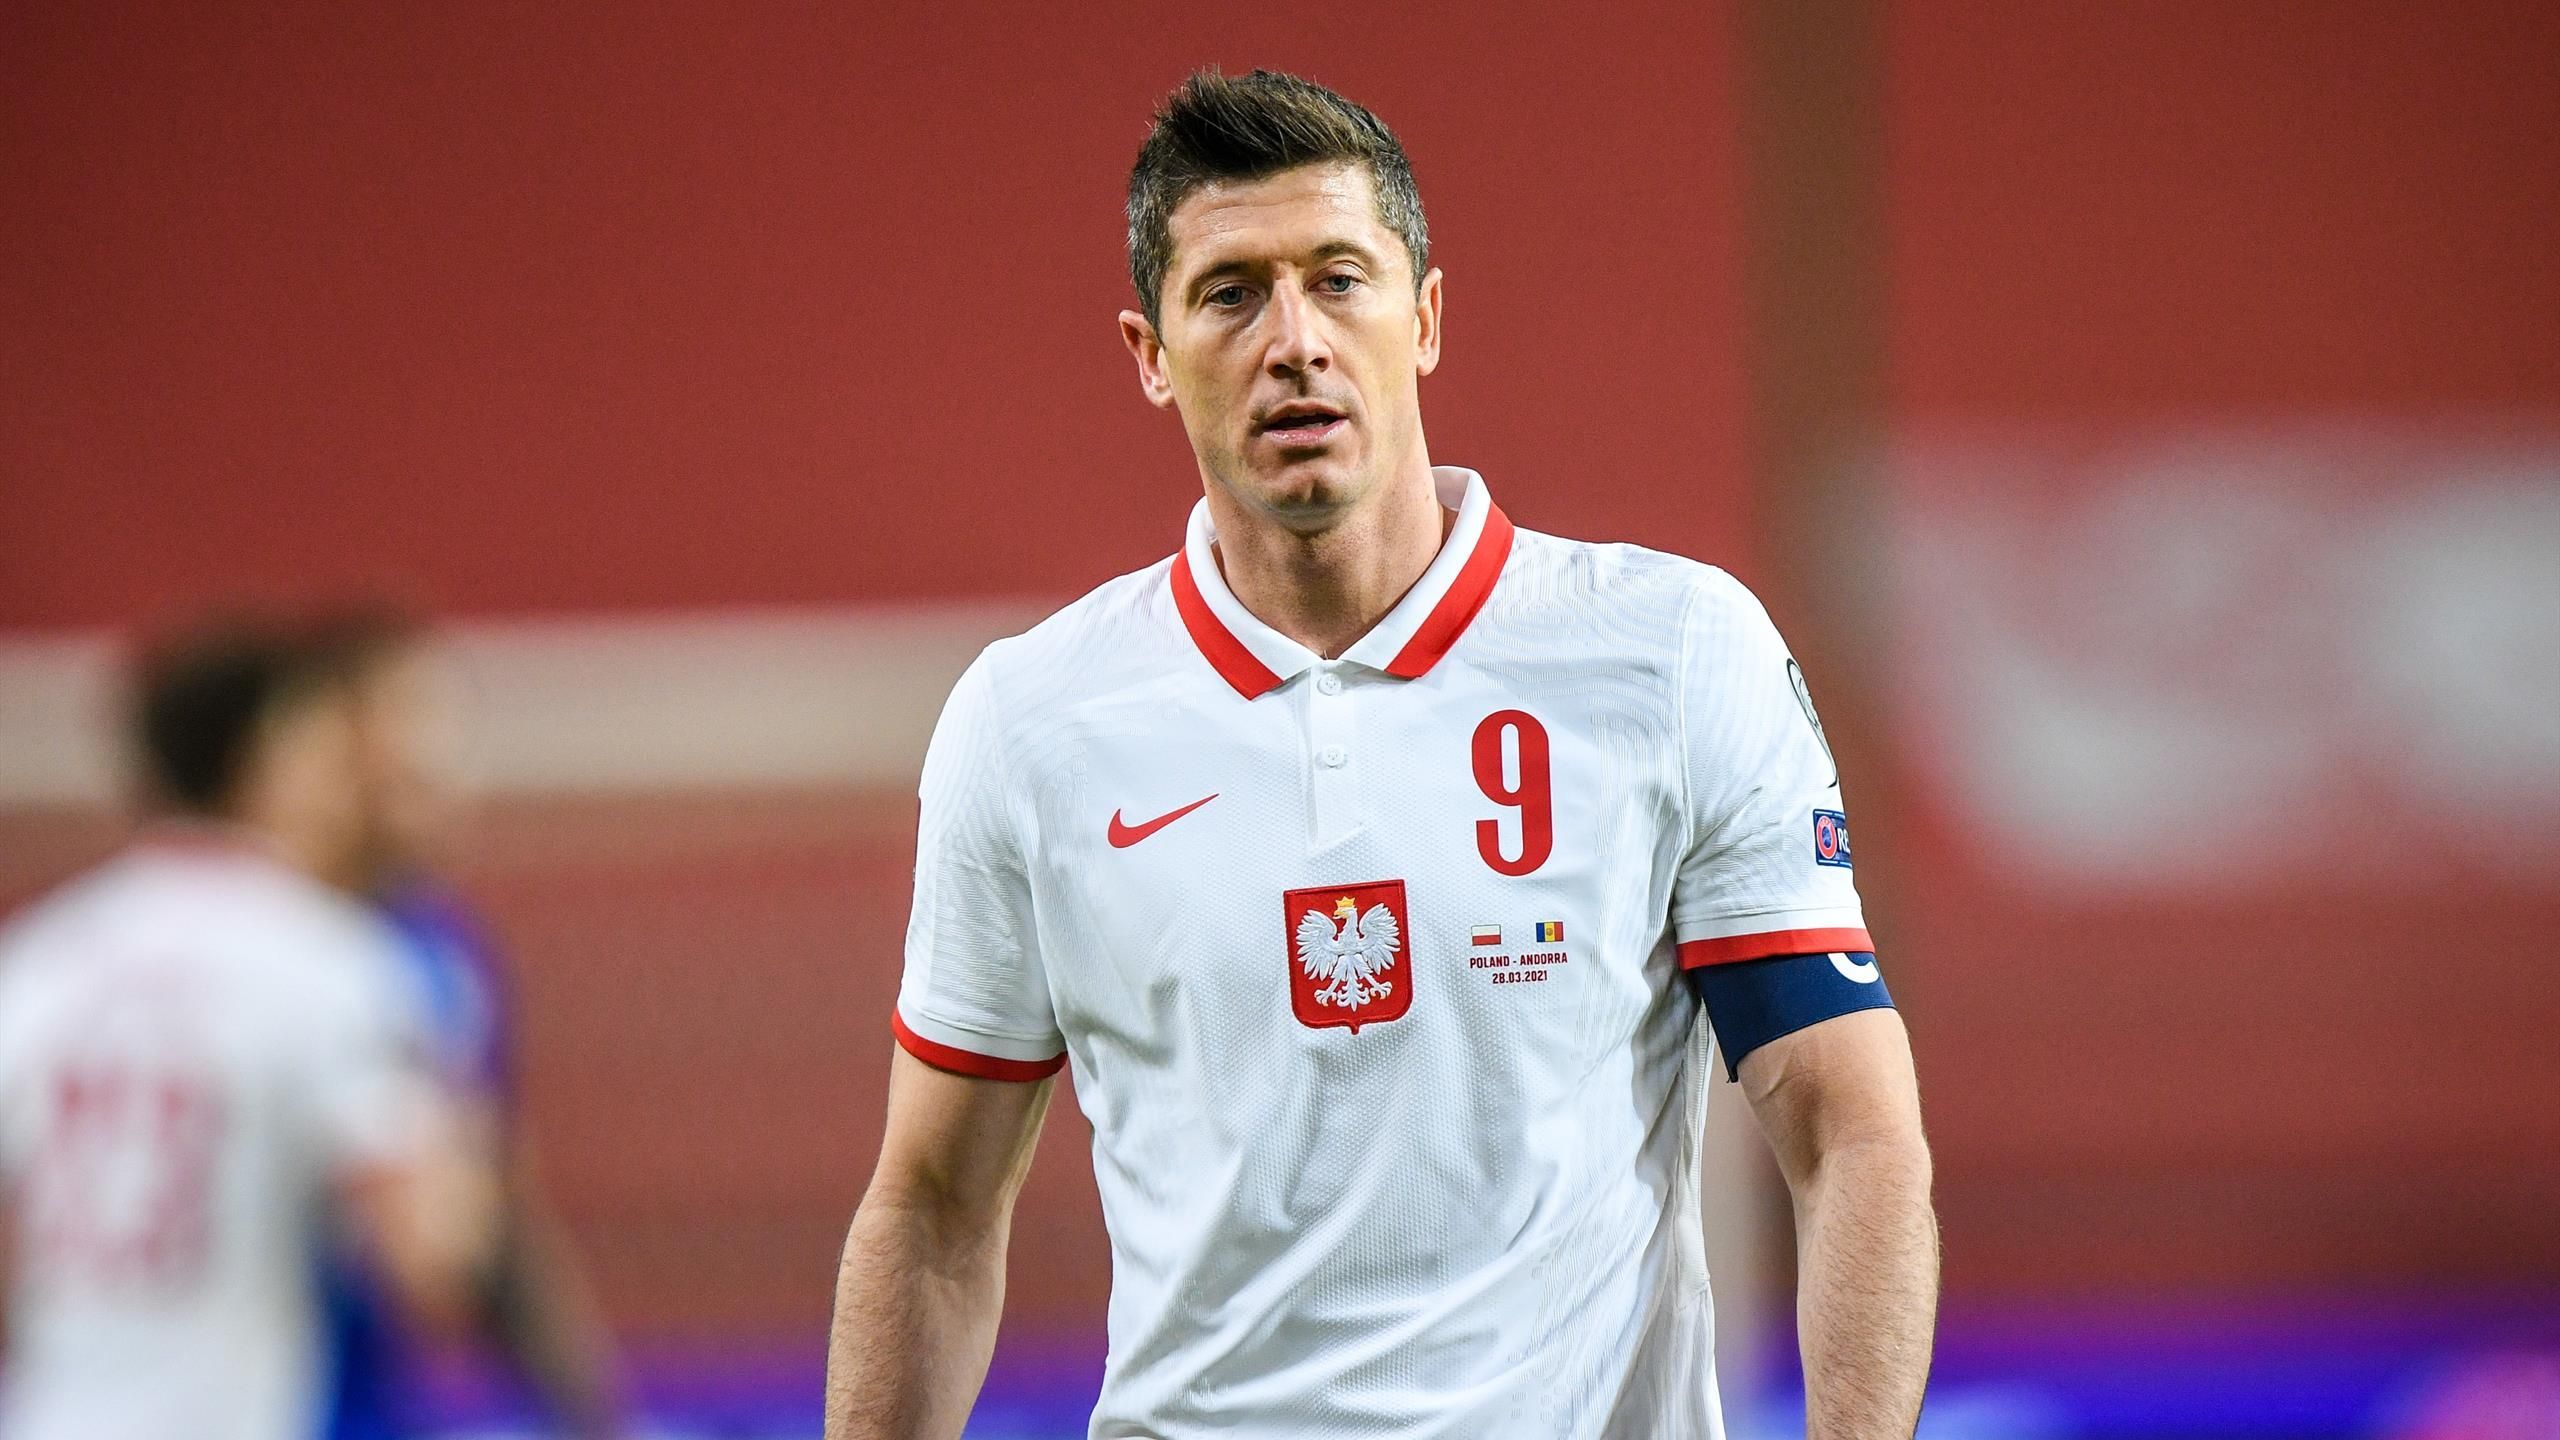 Injury rules Robert Lewandowski out of Poland's World Cup qualifier with England at Wembley